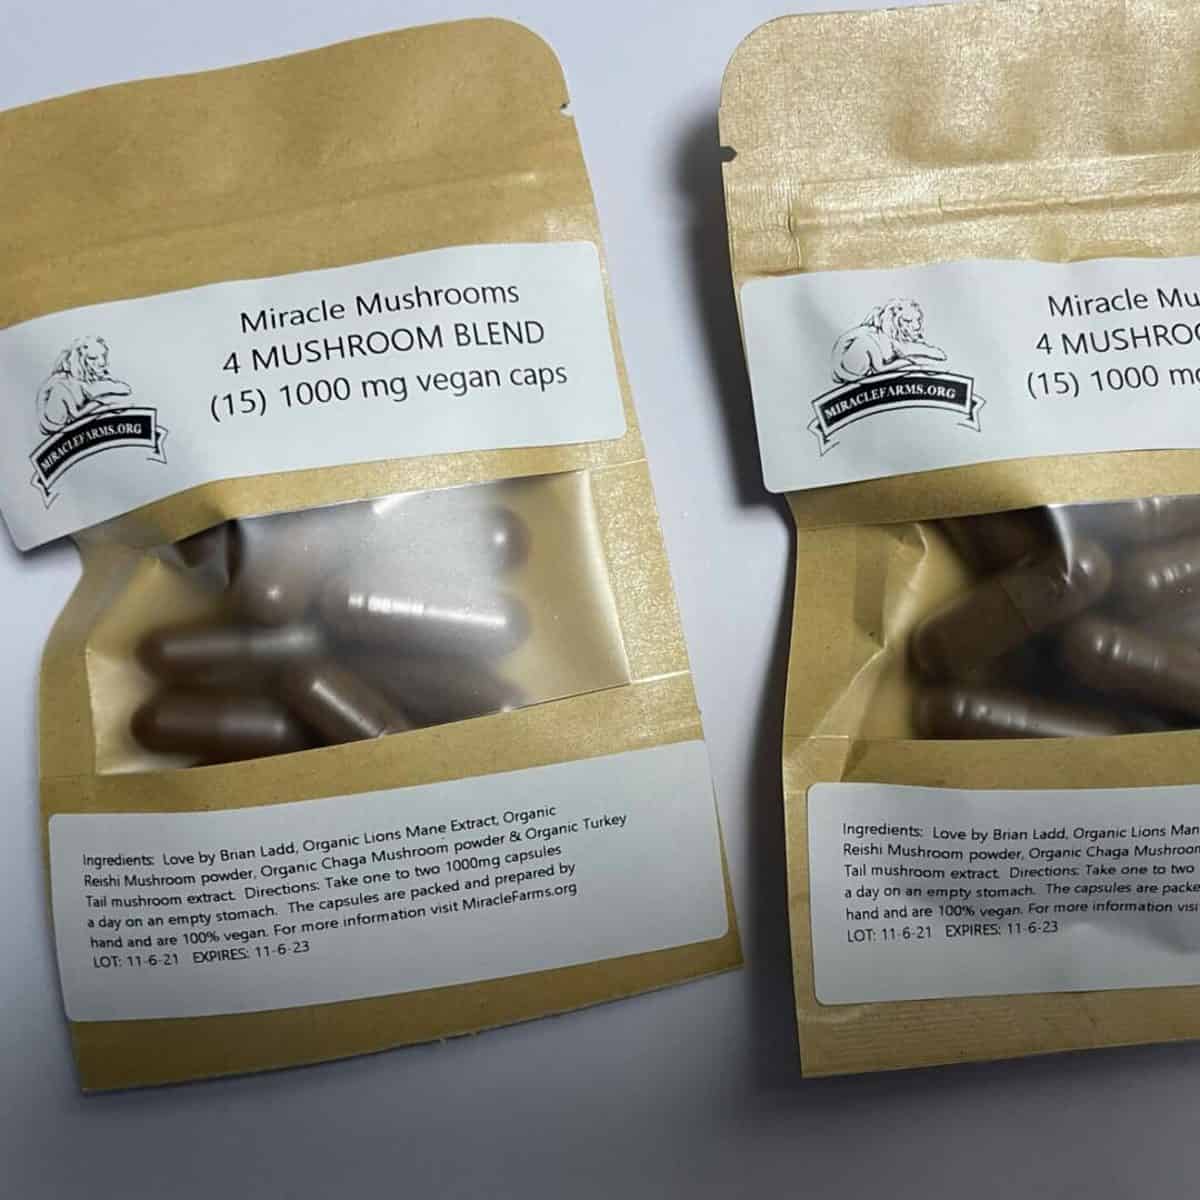 This is our Happy version of our gourmet mushroom site, MiracleFarms.org, and as our URL implies, we sell Golden Teacher mushroom spores, spore swabs, and spore prints along with over 100 other cubensis strains. We have been in business since 2005 and although we grow over 100 gourmet stains in our Florida-based lab/farm, we source all our psychedelic and cubensis spores from two well established distributors based in Amsterdam, Netherlands. We pride ourselves on always providing high-quality, contaminate-free spore syringes, spore swabs, and spore prints. All our products are produced in our clean room, in front of a laminar flow hood, and in full PPE. We use high-quality materials in all our products and every order is sealed in a discrete, tamperproof holographic mylar container (see products photos). Our spore syringes, swabs, and prints are no older than 60 days and are close to contaminate-free as we can make them. No compony can claim 100% contamination free, especially when dealing with spores, however with almost two decades of experience, we now come pretty close.